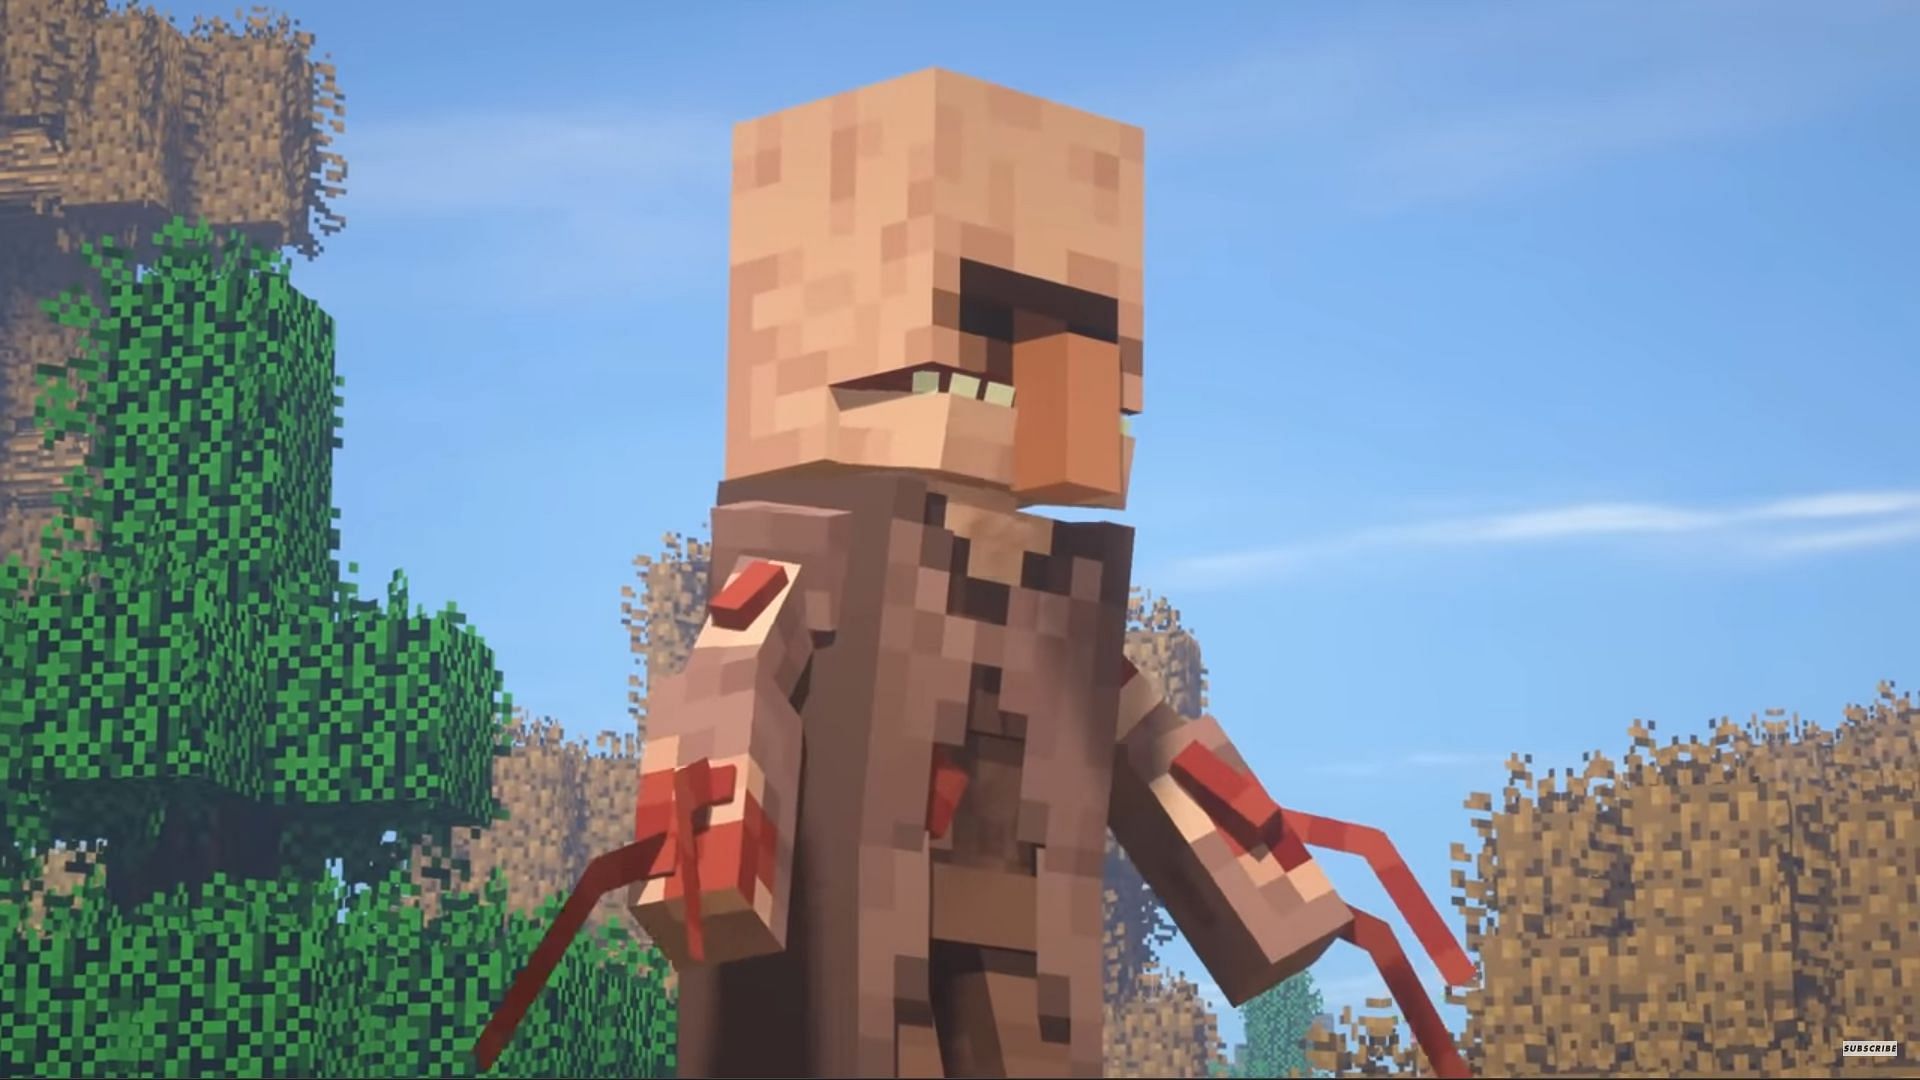 The Parasites modpack turns most passive mobs into infected hostile entities in Minecraft (Image via YouTube/Forge Labs)